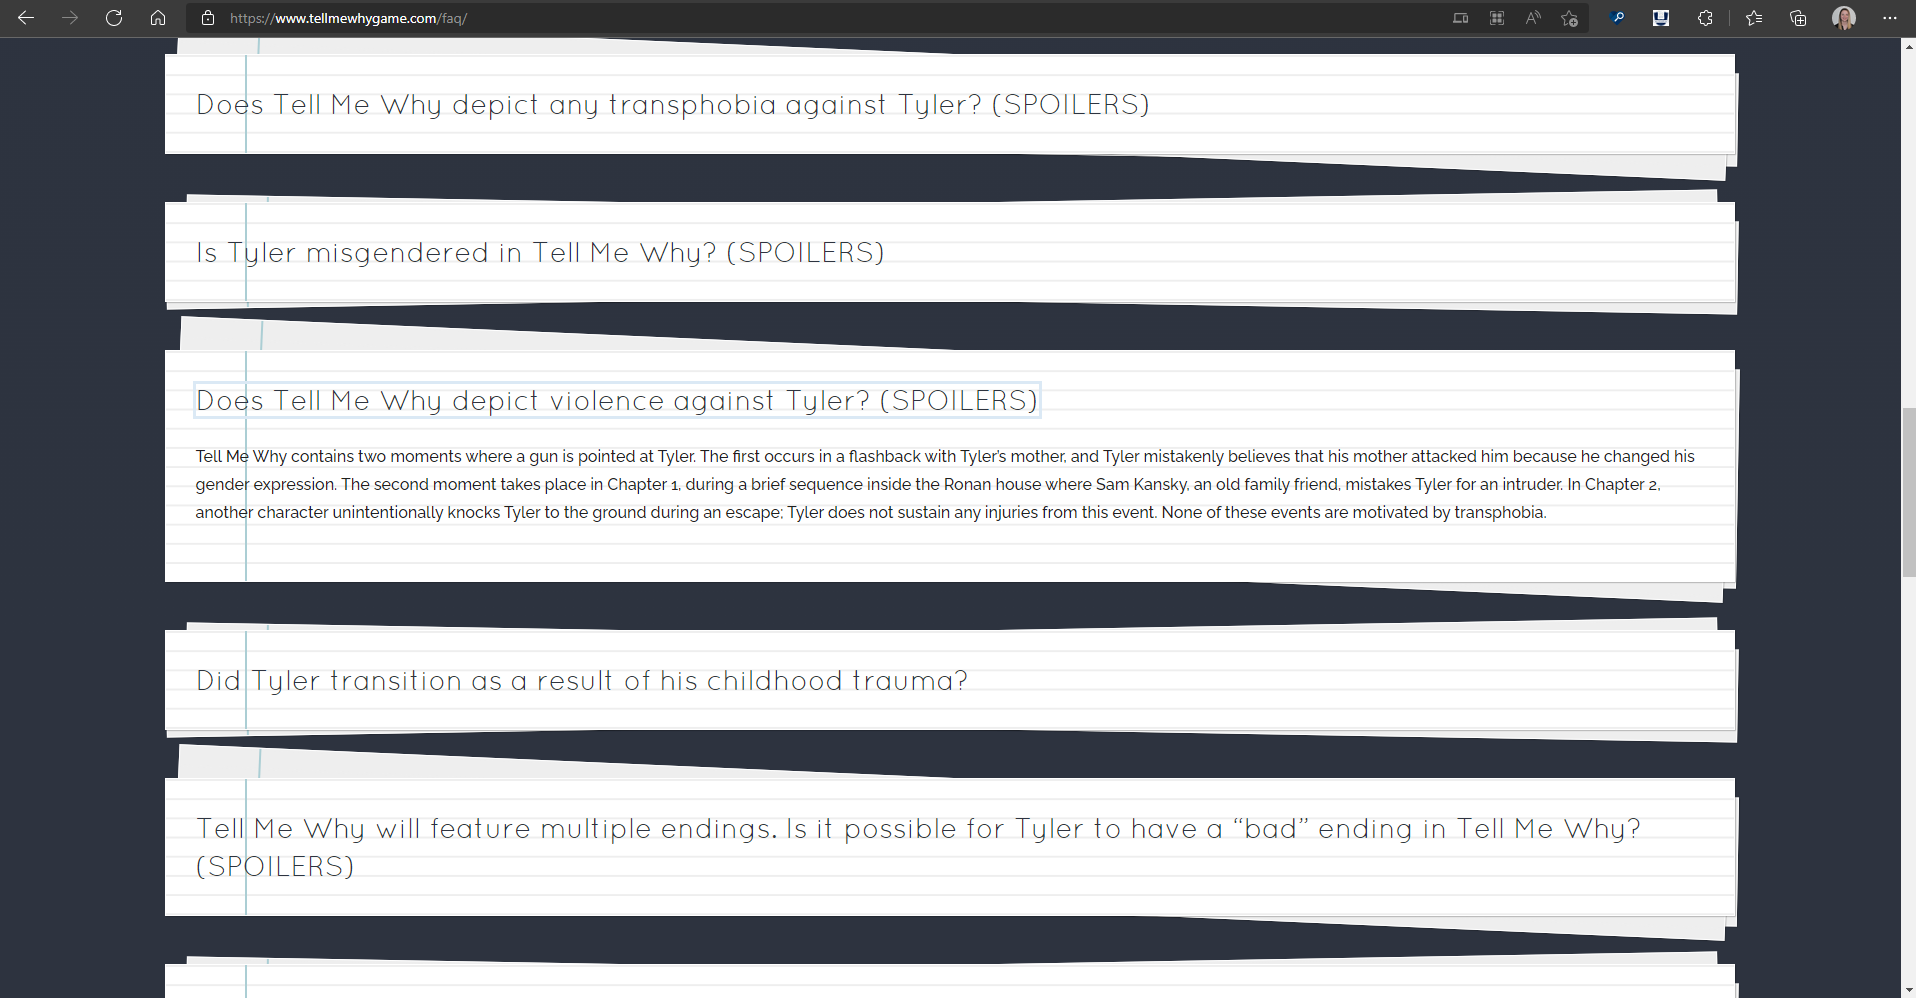 A screenshot of the Tell Me Why FAQ site. The questions on-screen include "does tell me why depict any transphobia against tyler?" "Is tyler misgendered in Tell Me Why?" "Does Tell Me Why depict violence against tyler?" "Does Tyler transition as a result of his childhood trauma?" "Tell me why will feature multiple endings. Is it possible for Tyler to have a bad ending?" Users can expand questions to reveal responses.